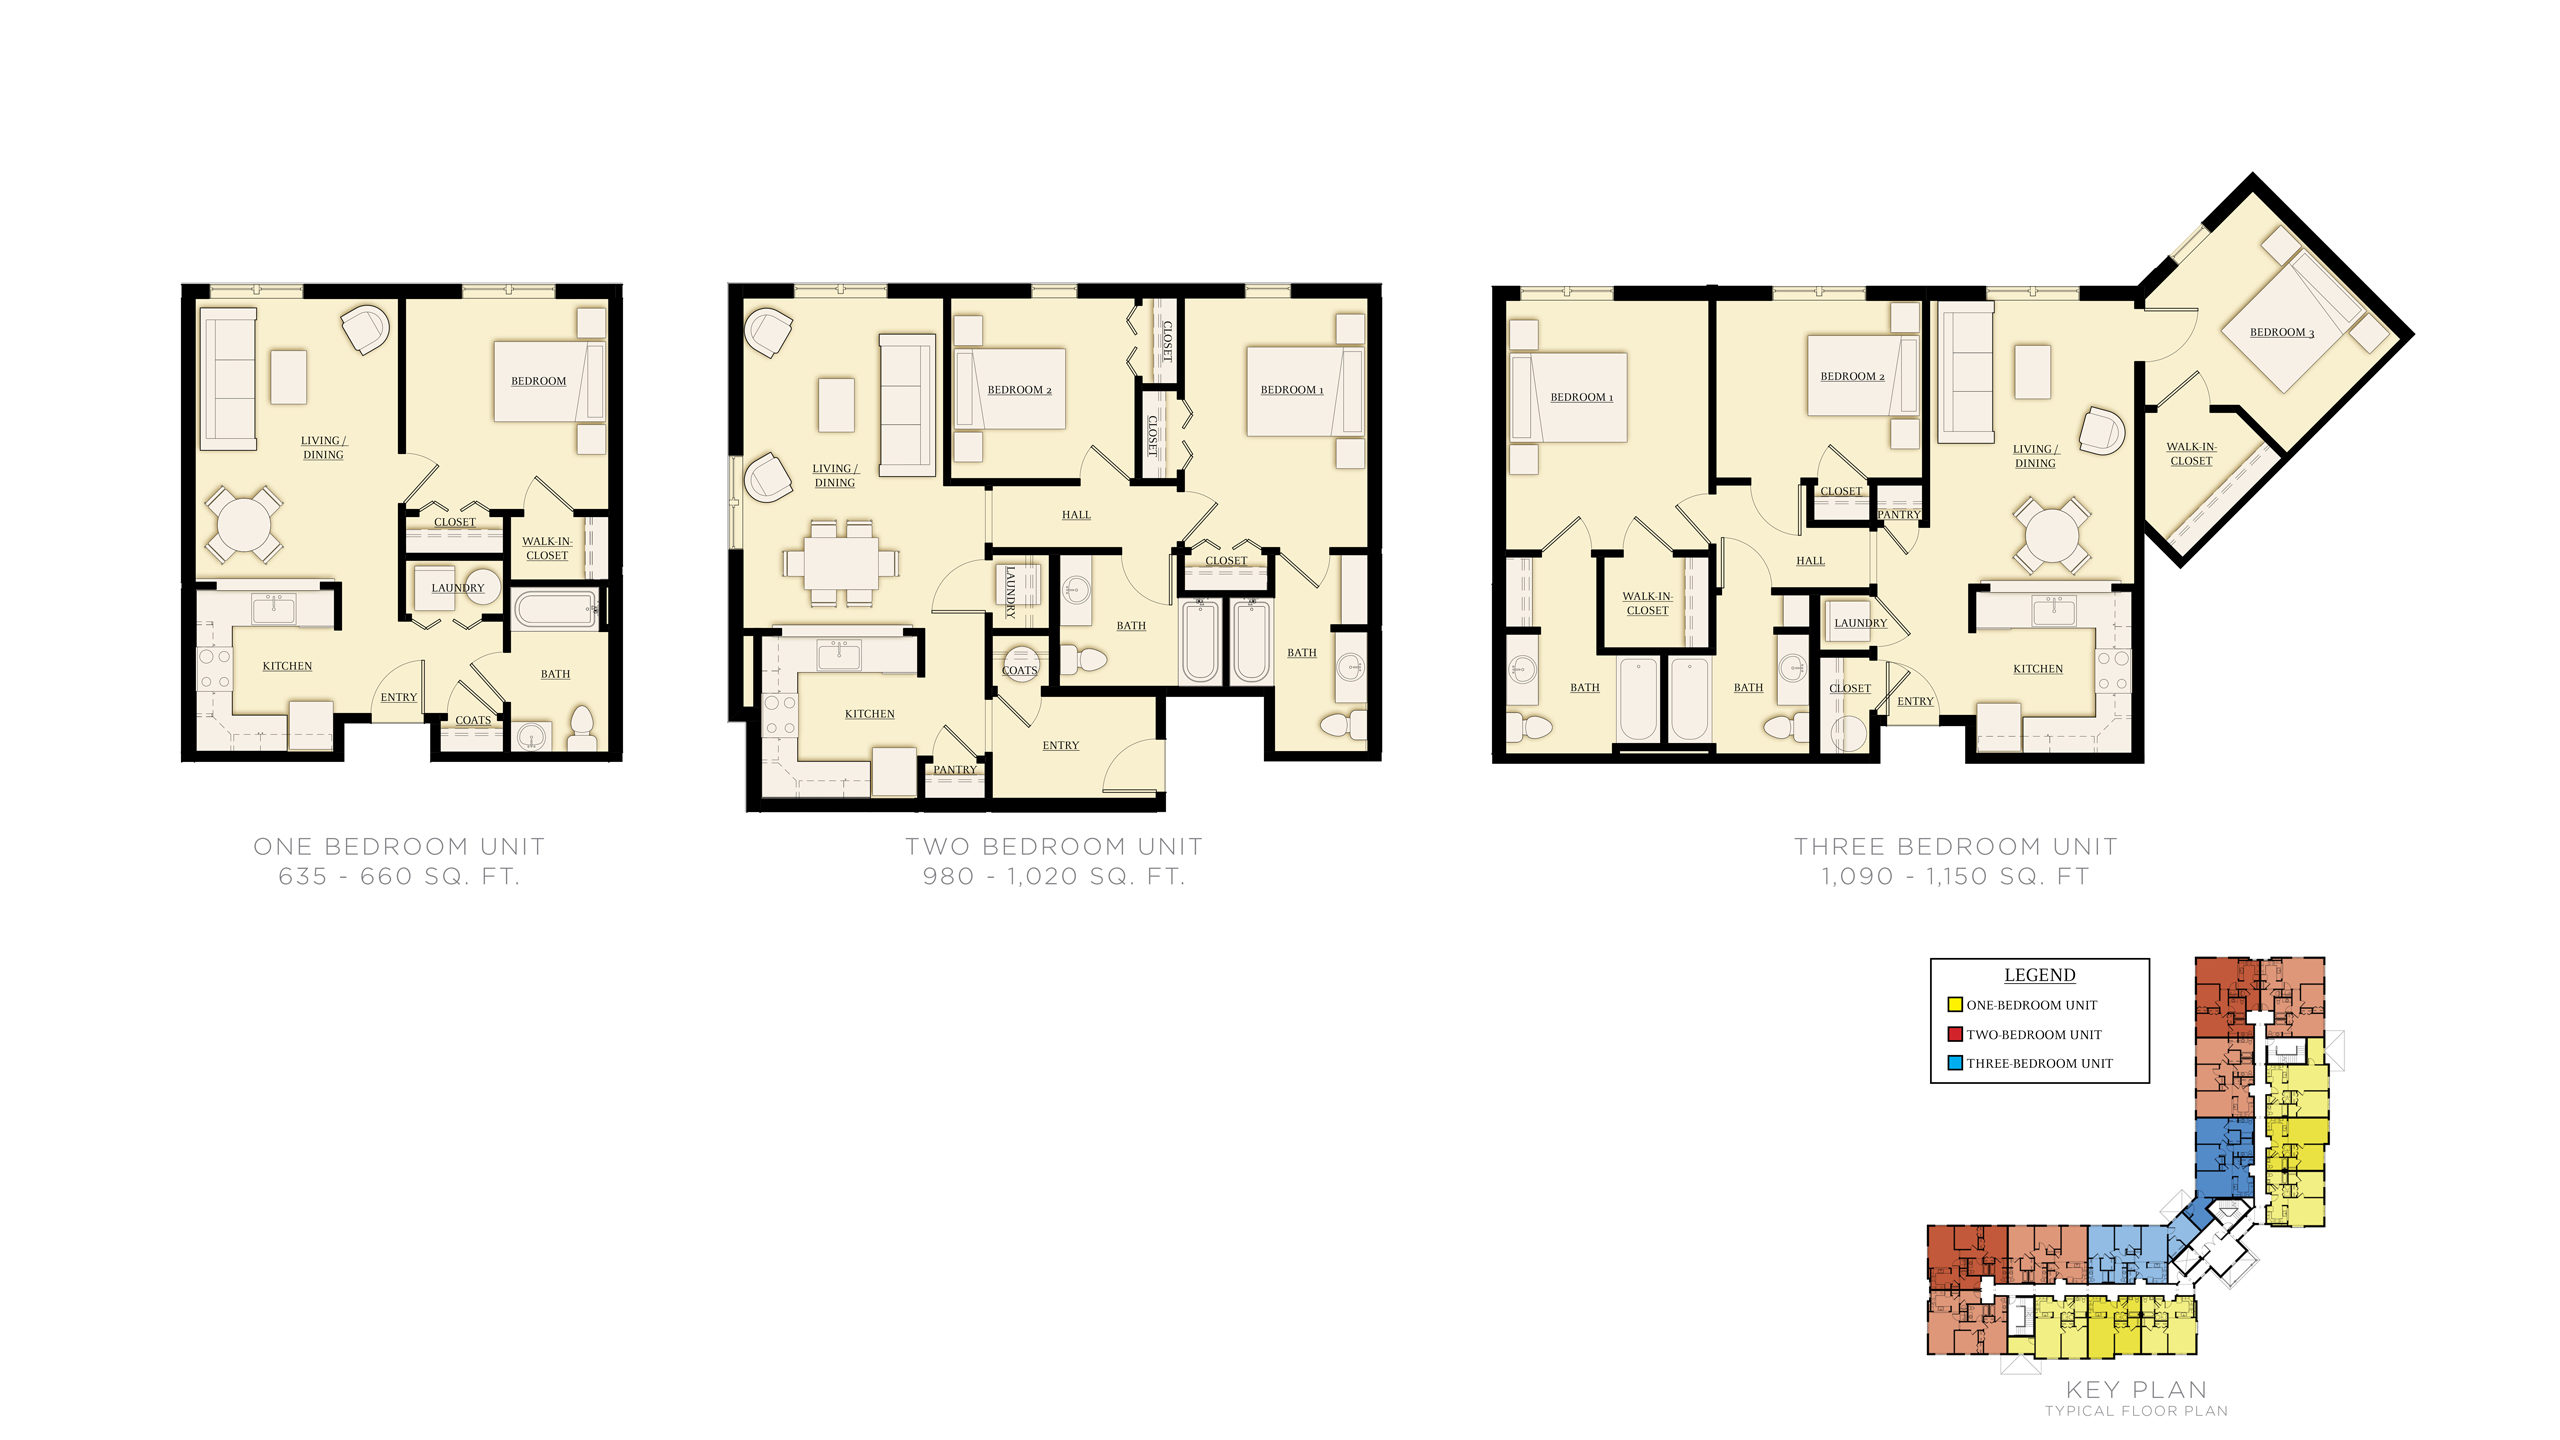 Typical one-, two-, and three-bedroom floor plans.